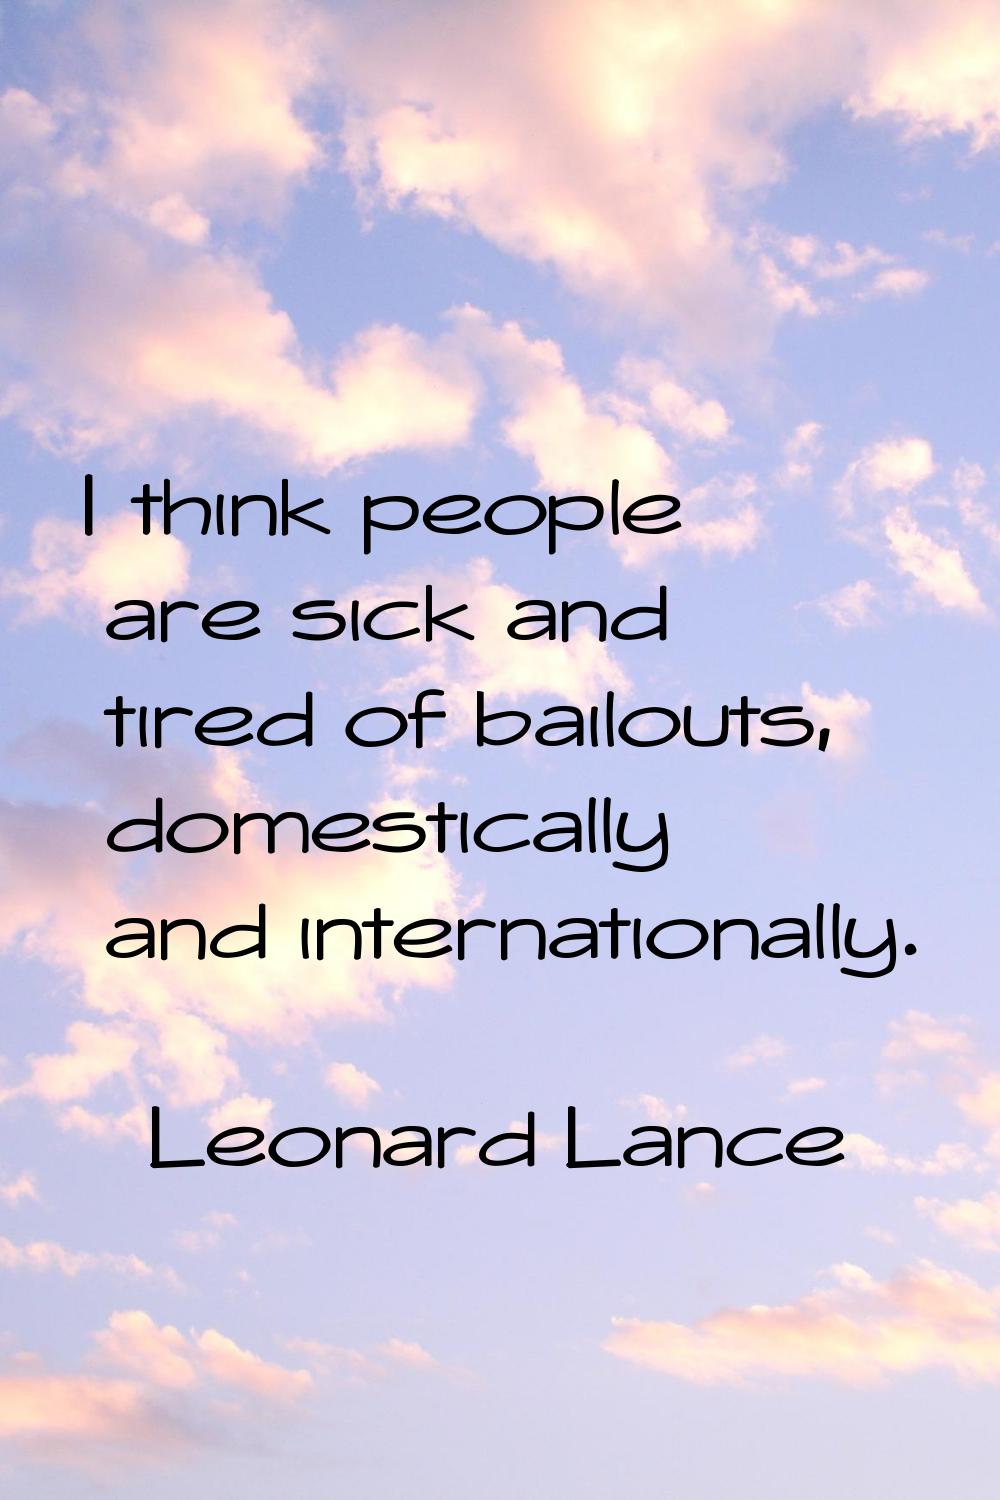 I think people are sick and tired of bailouts, domestically and internationally.